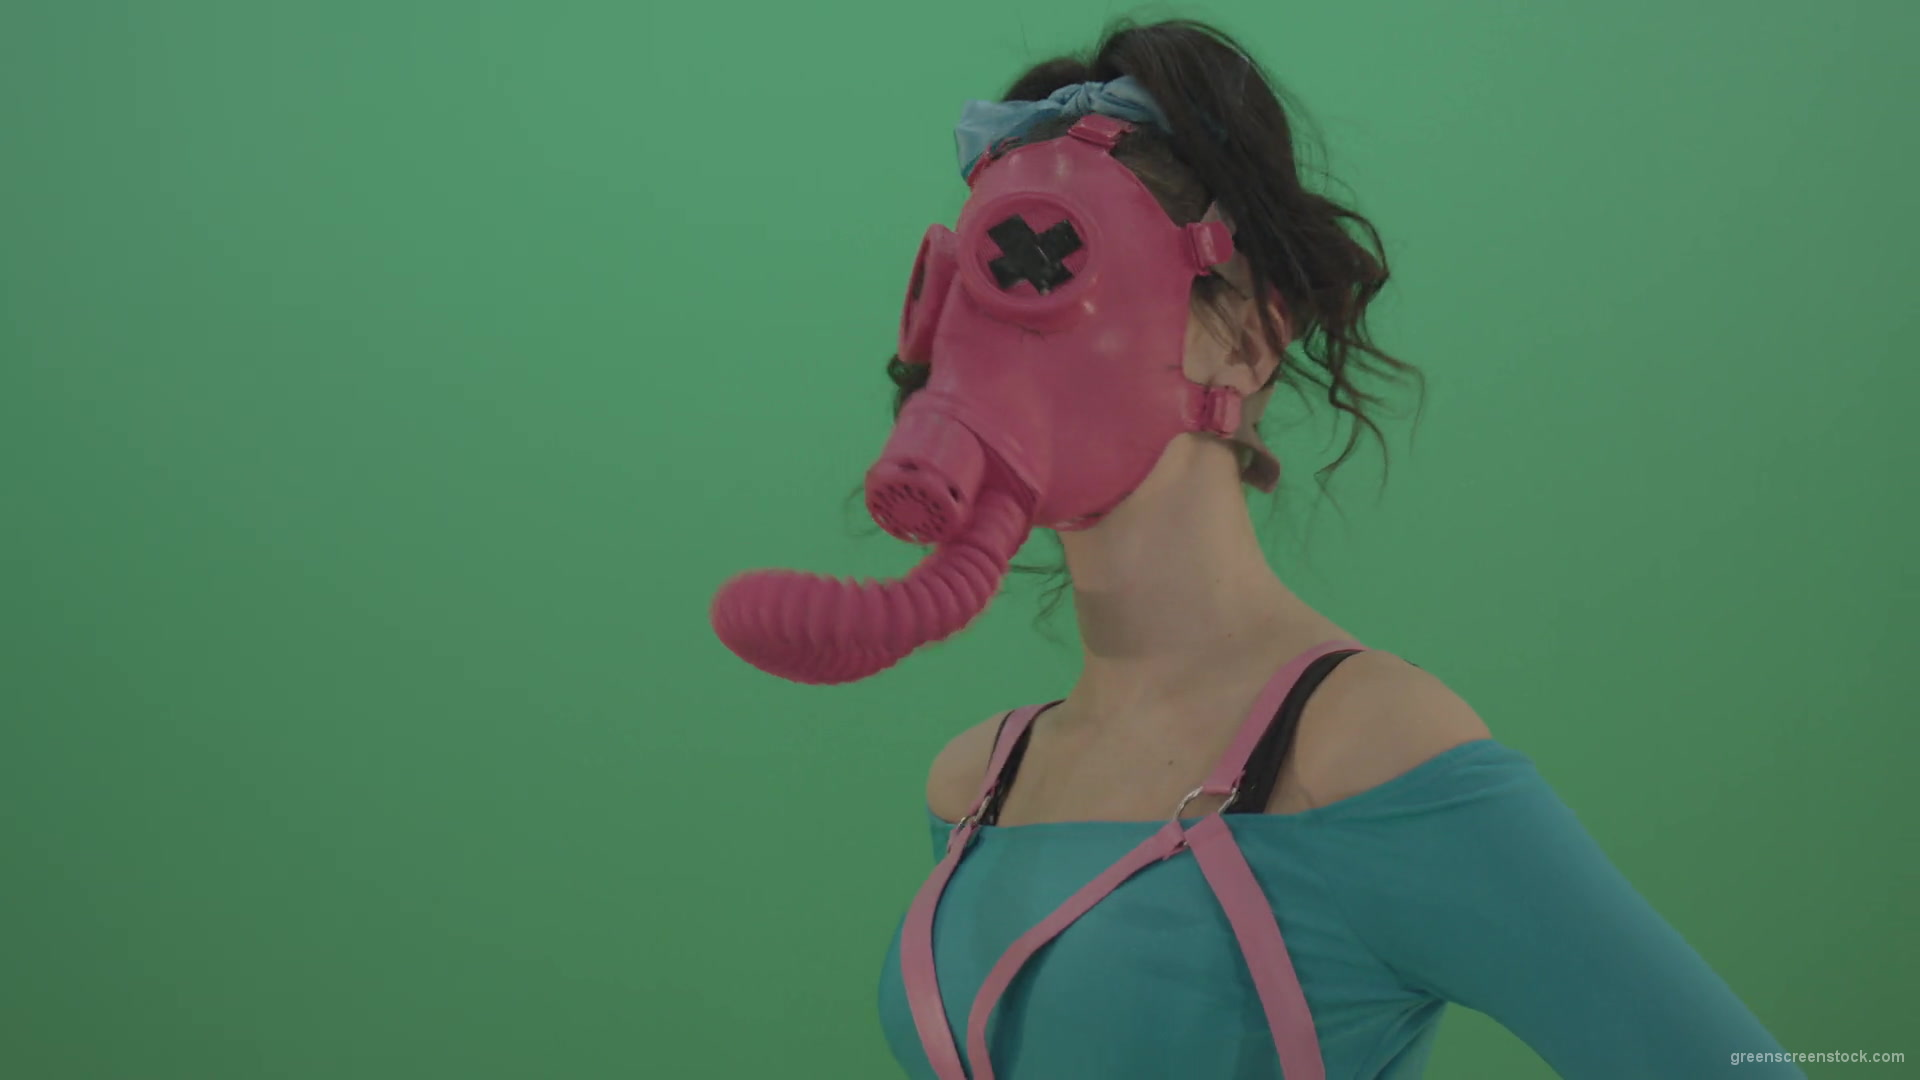 Pink-head-in-Gas-Mask-moving-Go-Go-Dance-isolated-on-green-screen-4K-Video-Footage-1920_002 Green Screen Stock